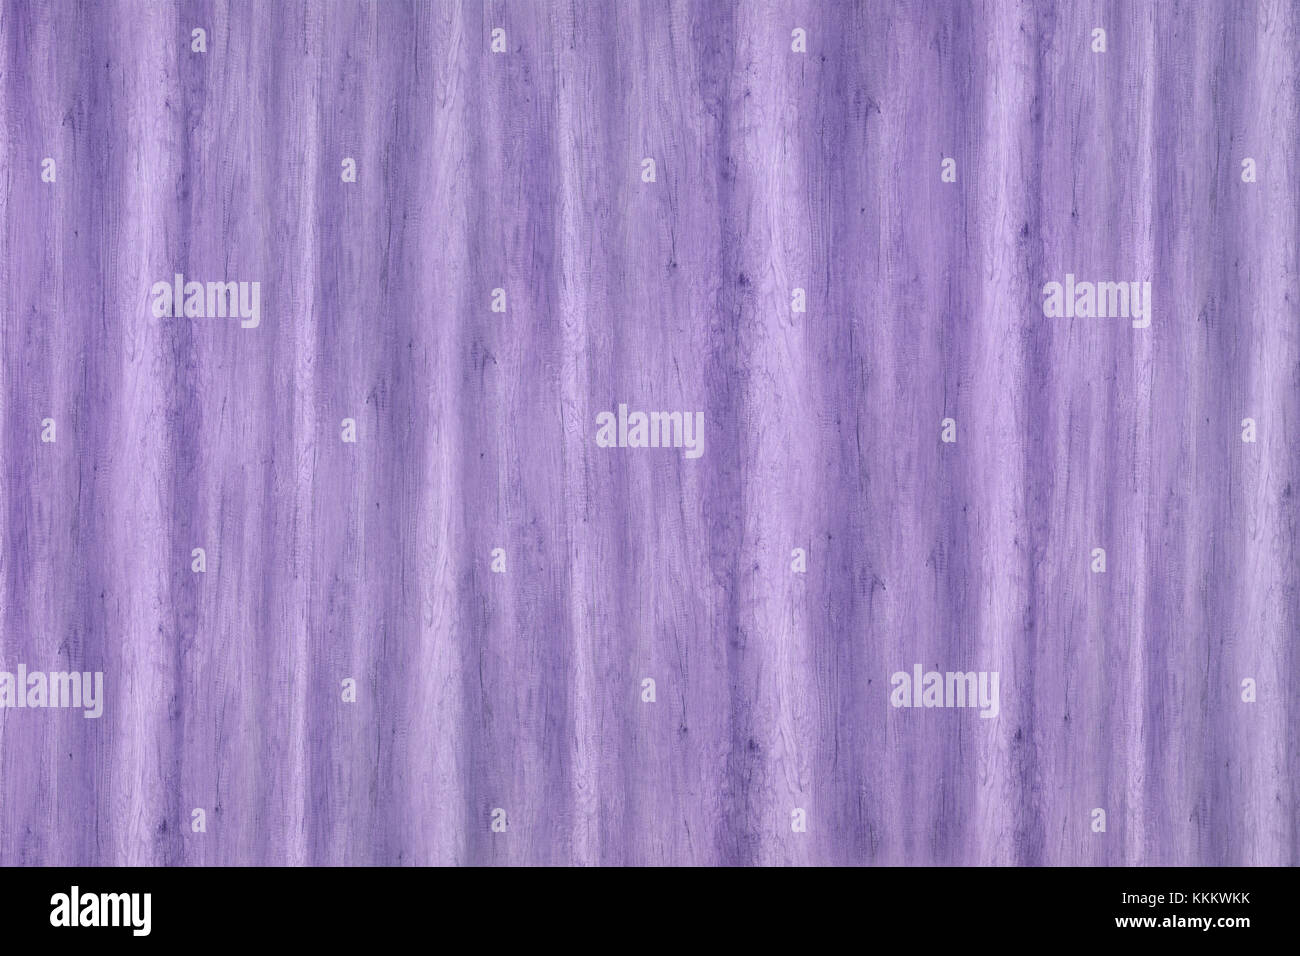 Wood texture with natural patterns, purple wooden texture Stock Photo